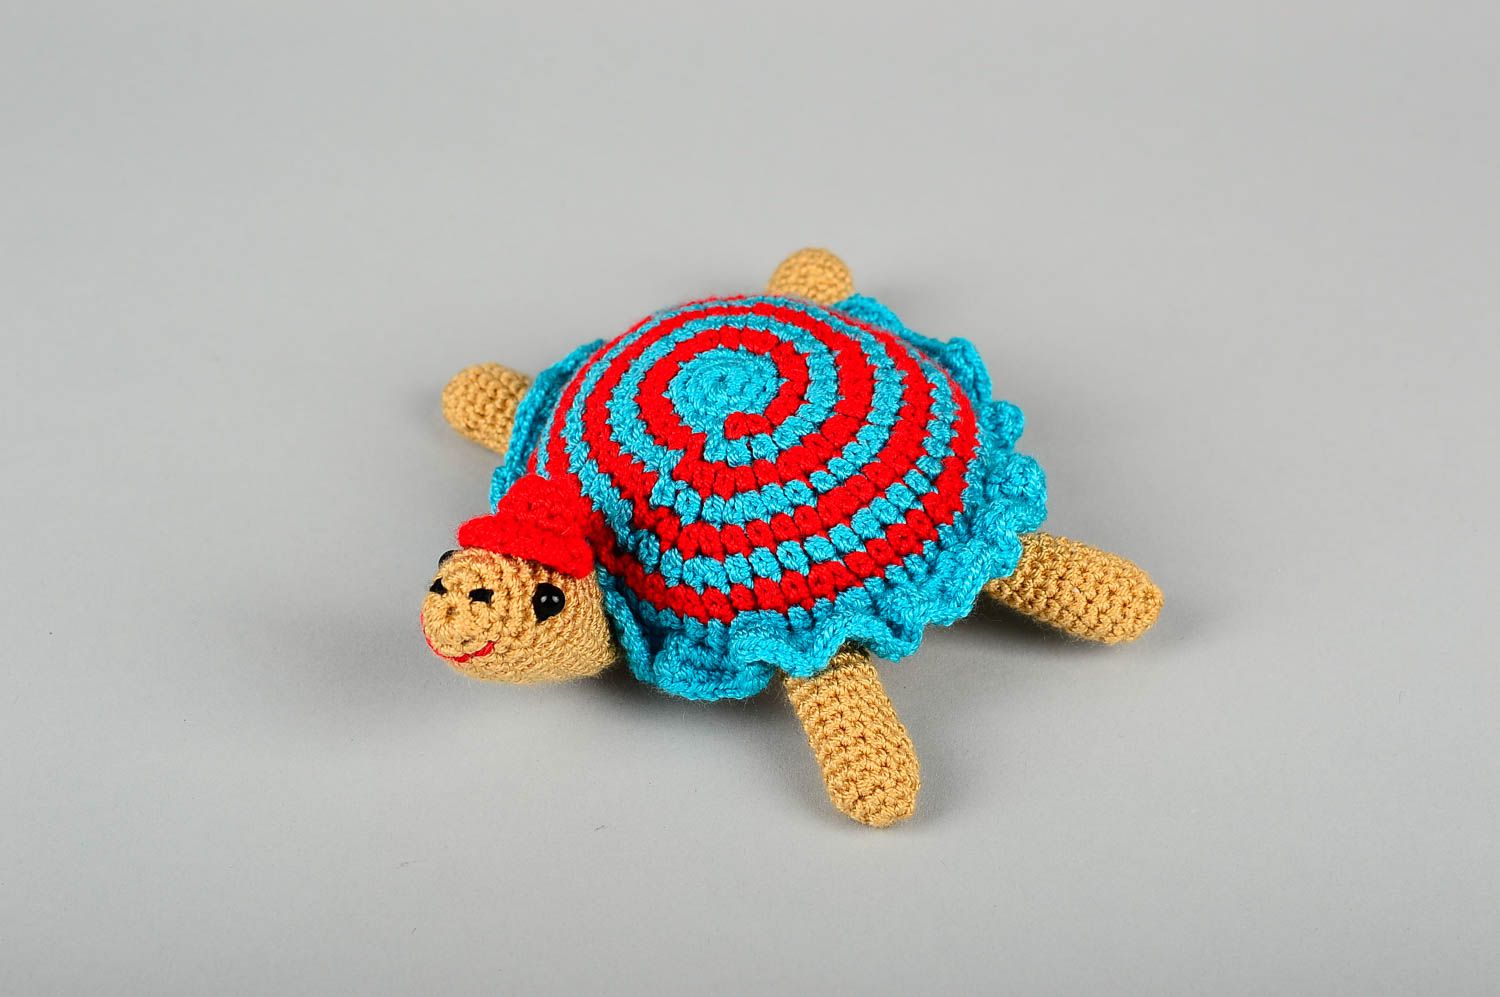 Beautiful handmade crochet toy best toys for kids soft toy birthday gift ideas photo 1